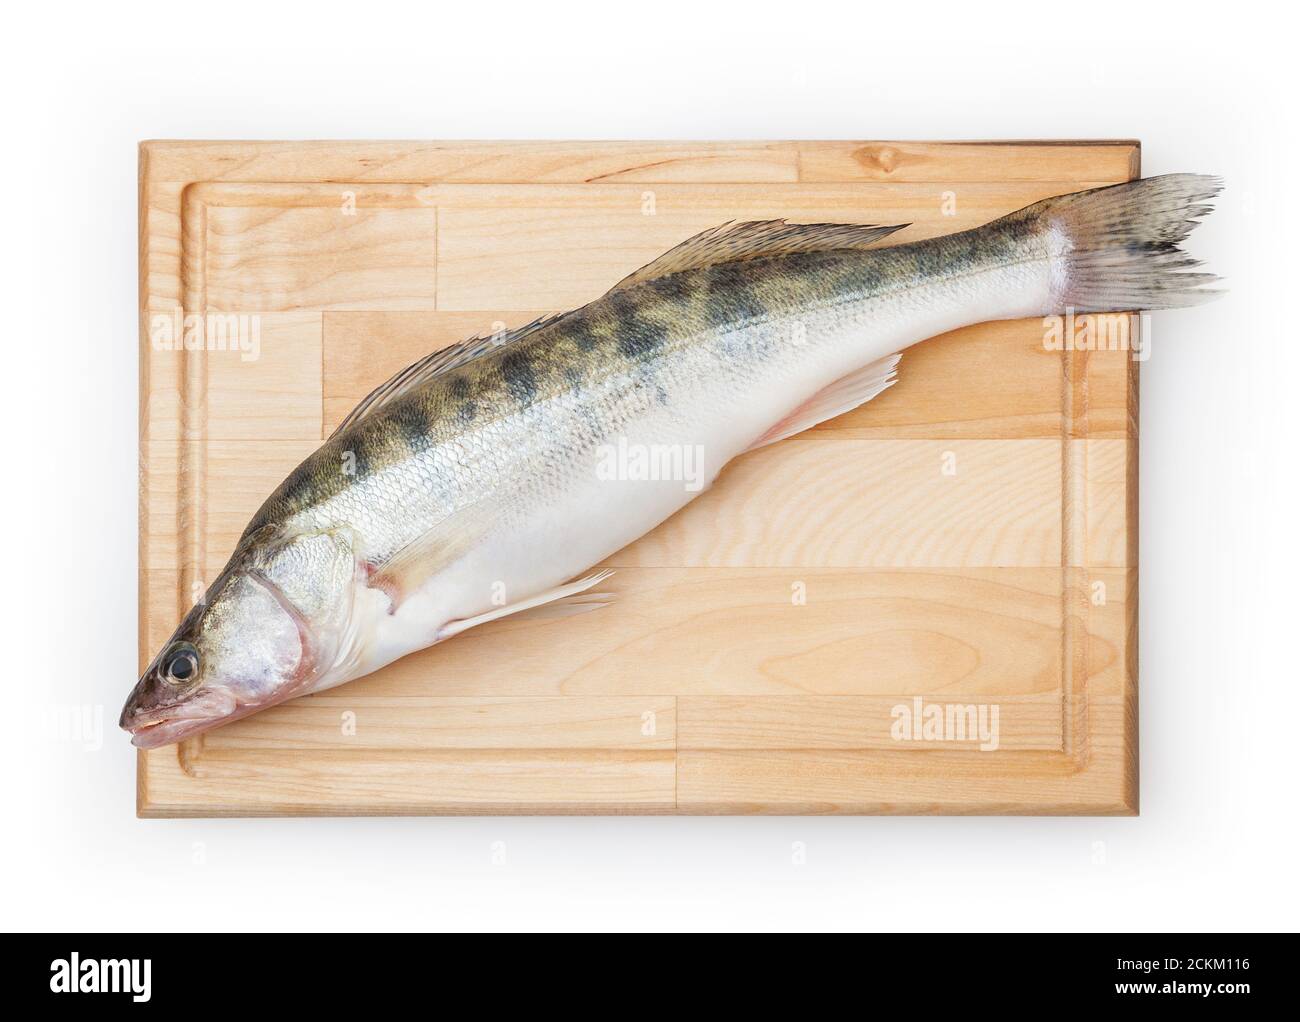 Fresh uncooked pike perch on wooden board isolated on white background with clipping path Stock Photo